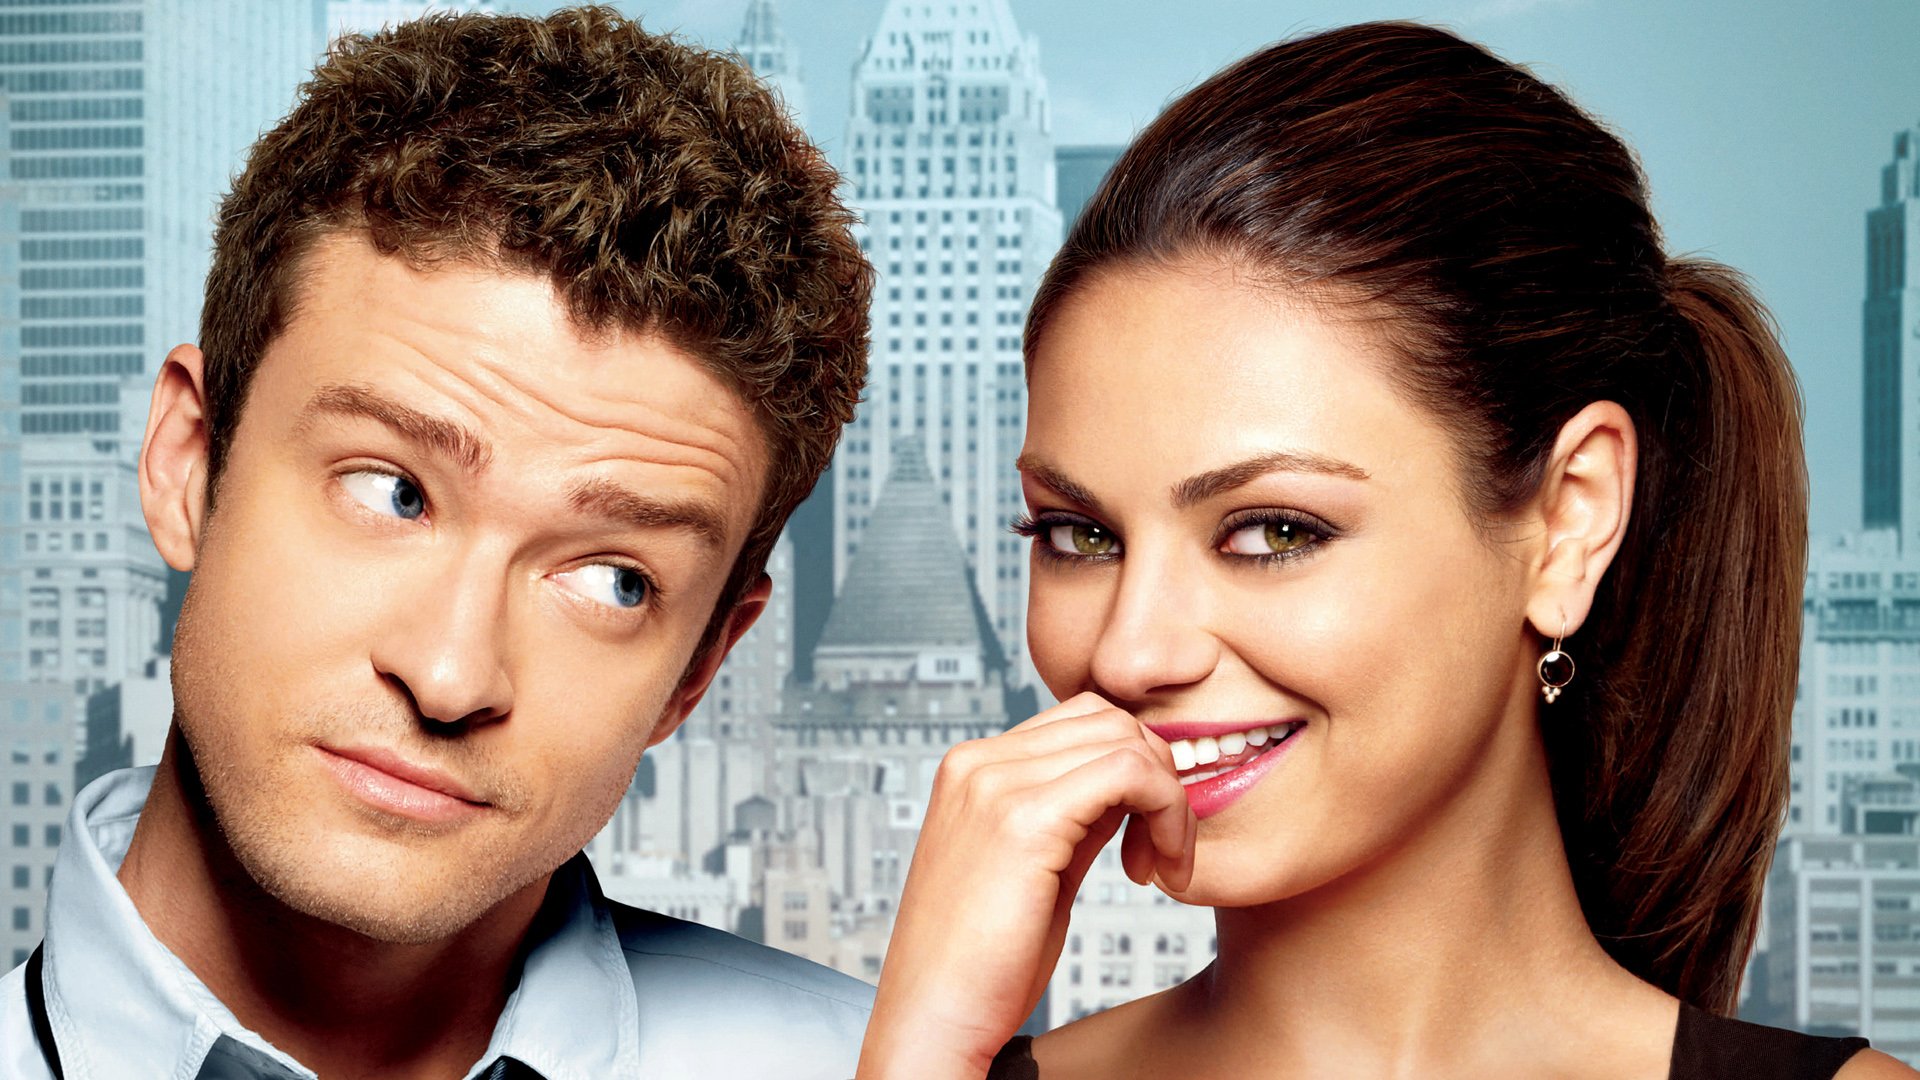 Friends With Benefits HD Wallpaper Background Image 1920x1080 1920x1080